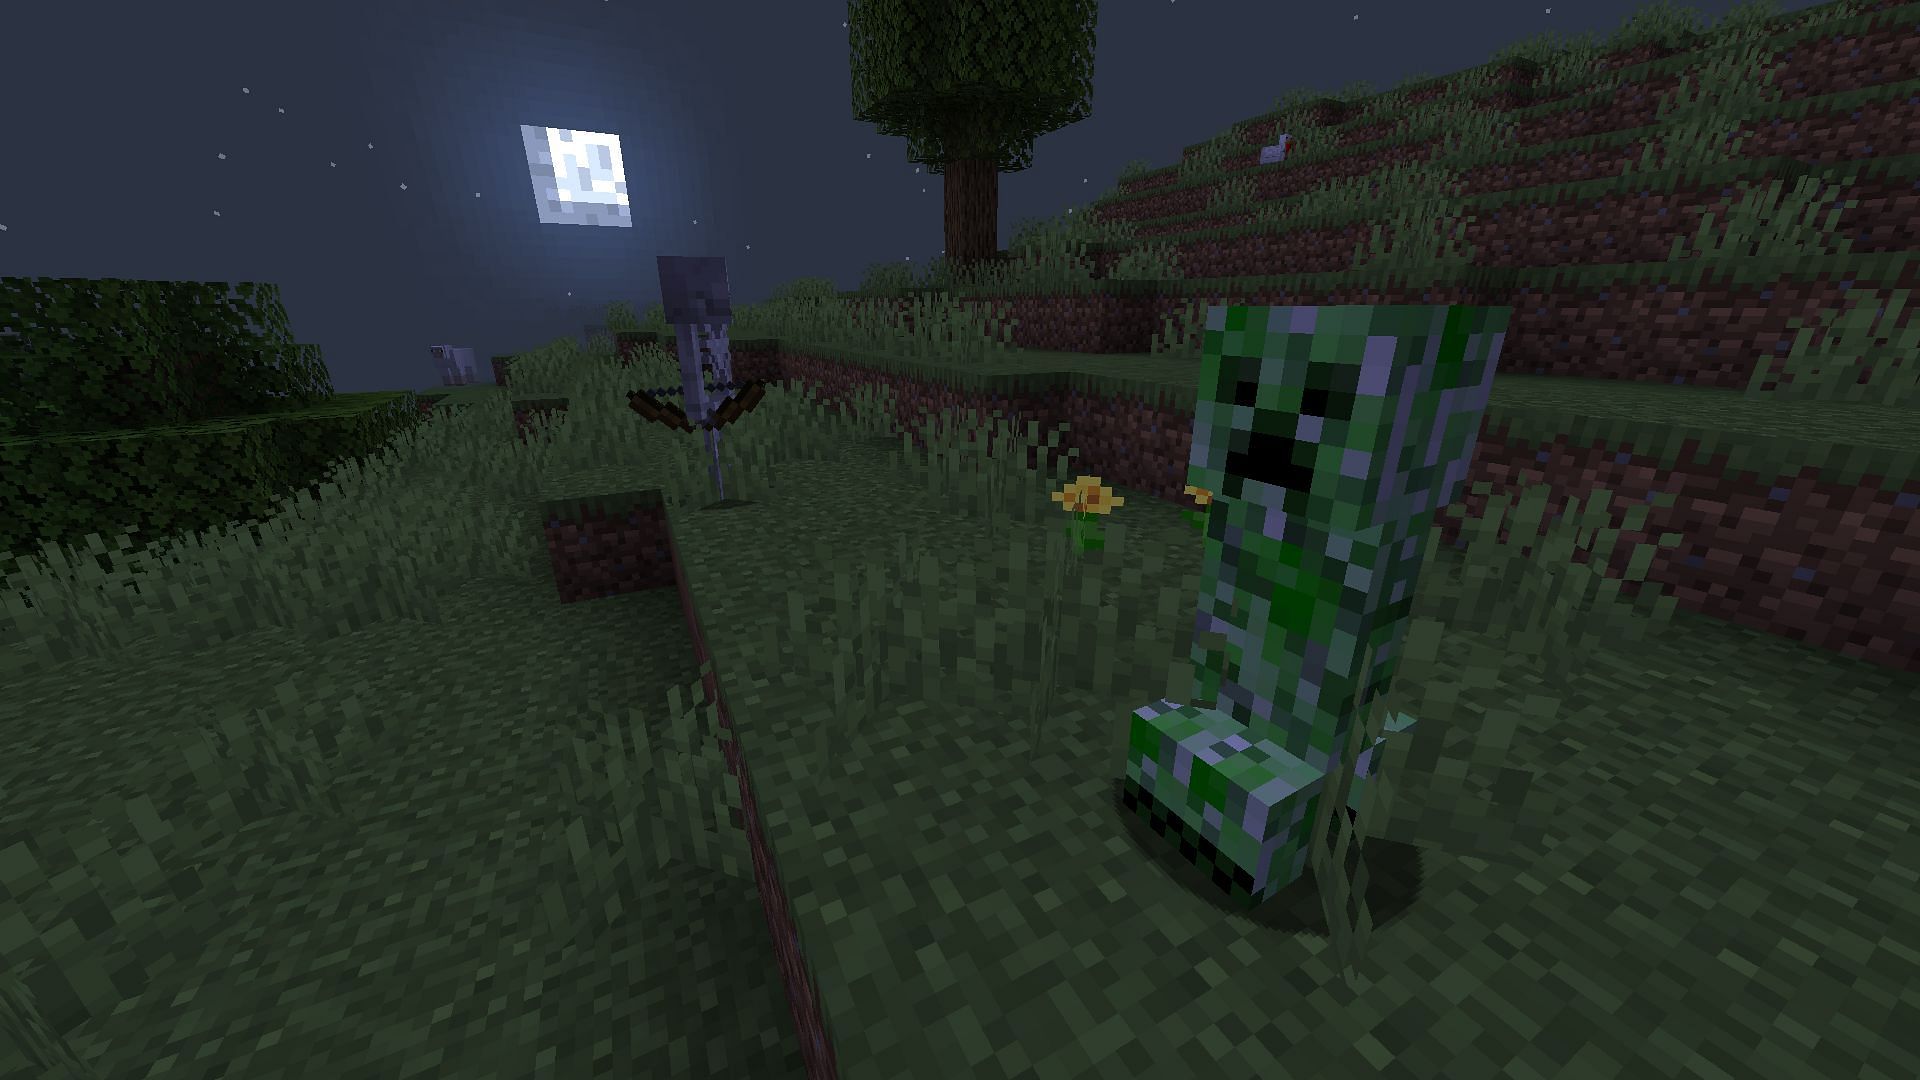 Hostile mobs in Minecraft will be much more powerful on hard difficulty (Image via Mojang)